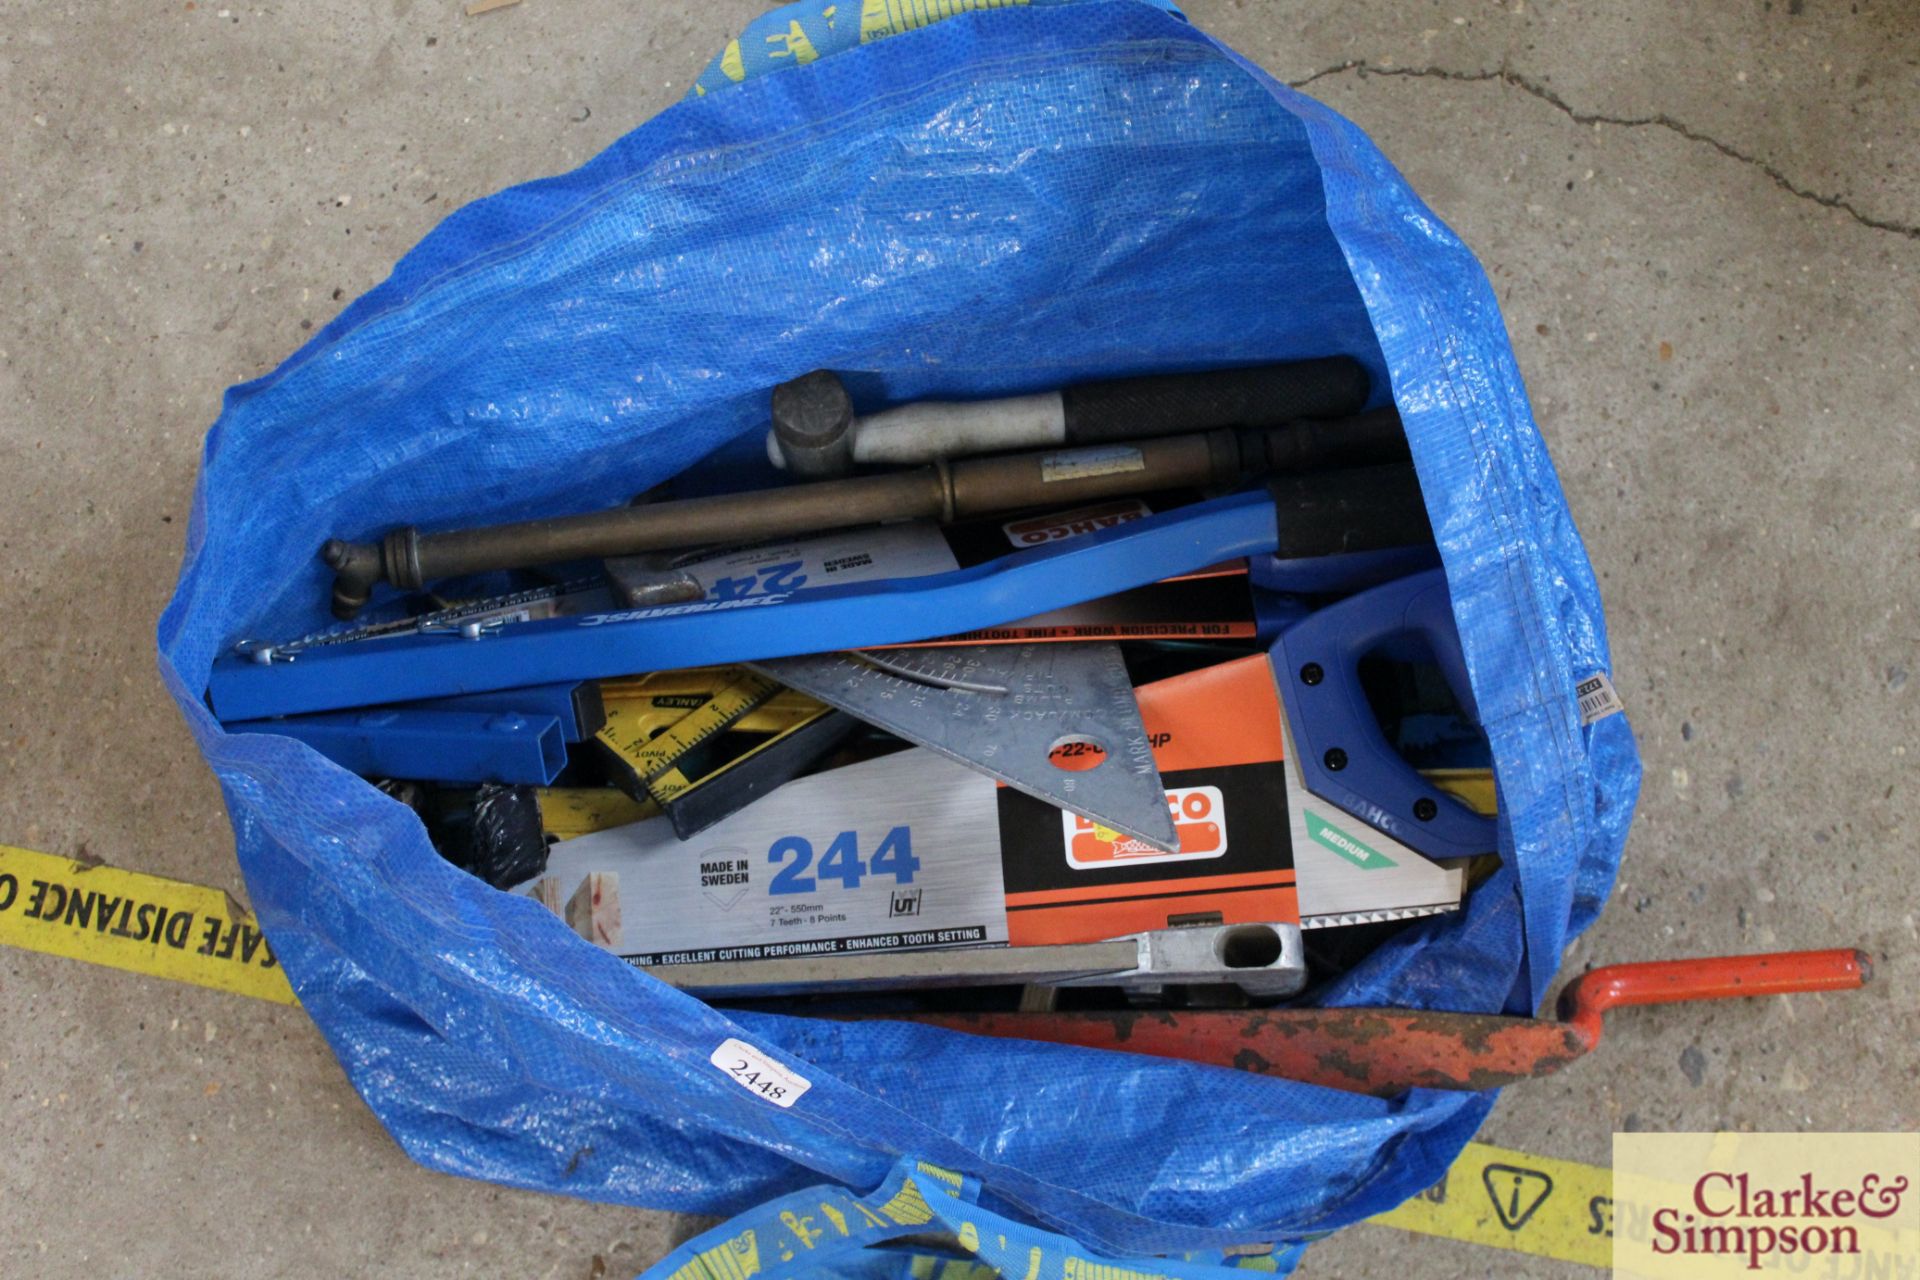 Tool bag containing various saws, squares etc. - Image 2 of 3